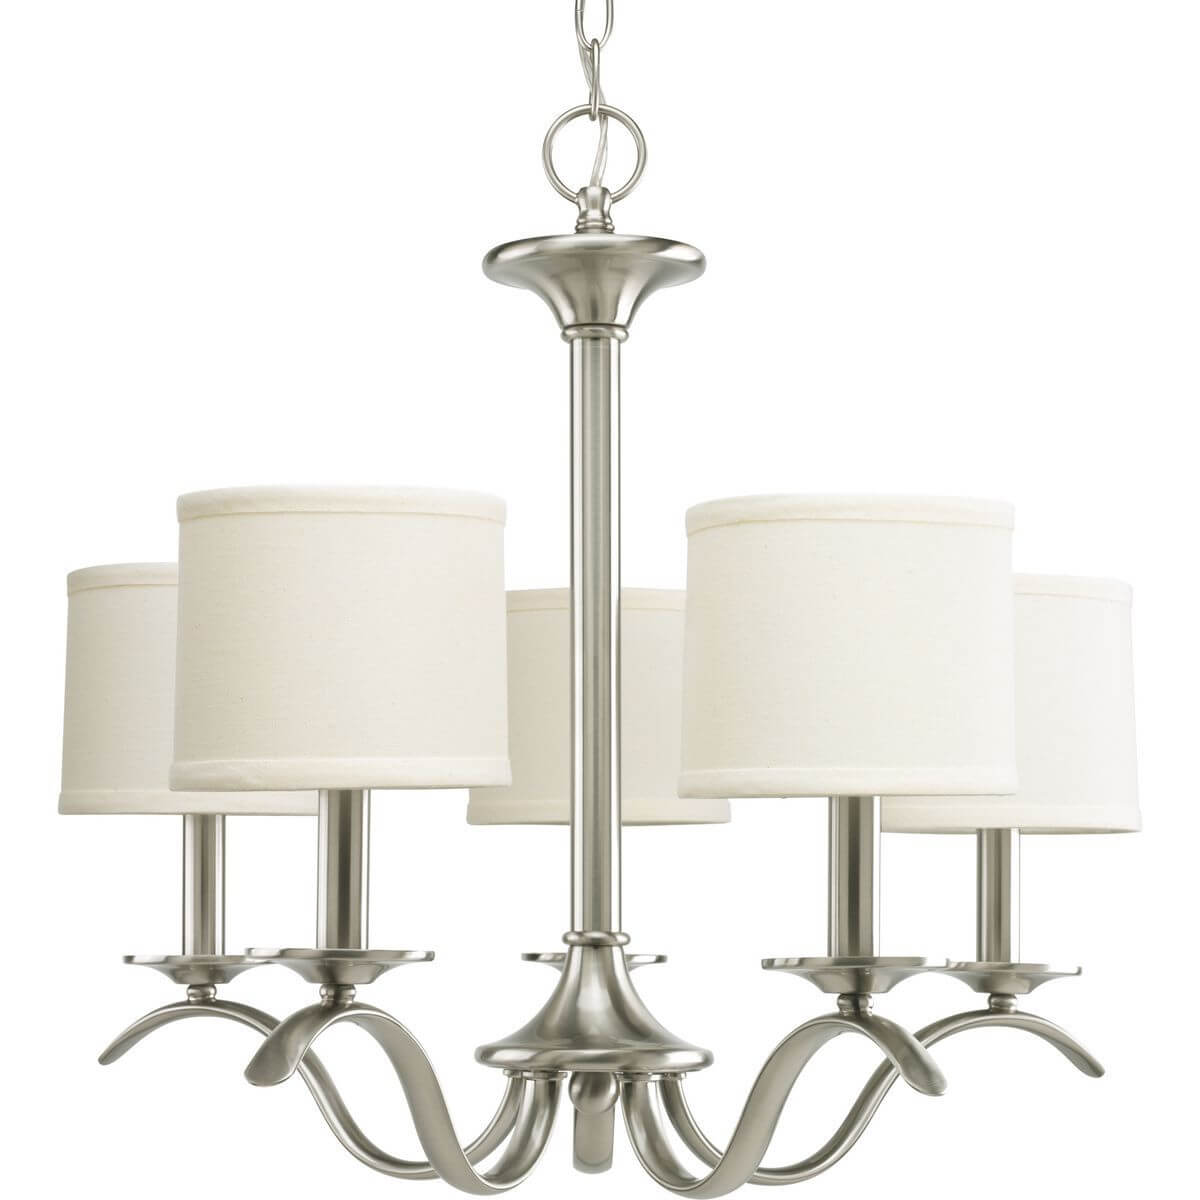 Progress Lighting Inspire 5 Light 23 inch Chandelier in Brushed Nickel with Off White Linen Drum Shades P4635-09